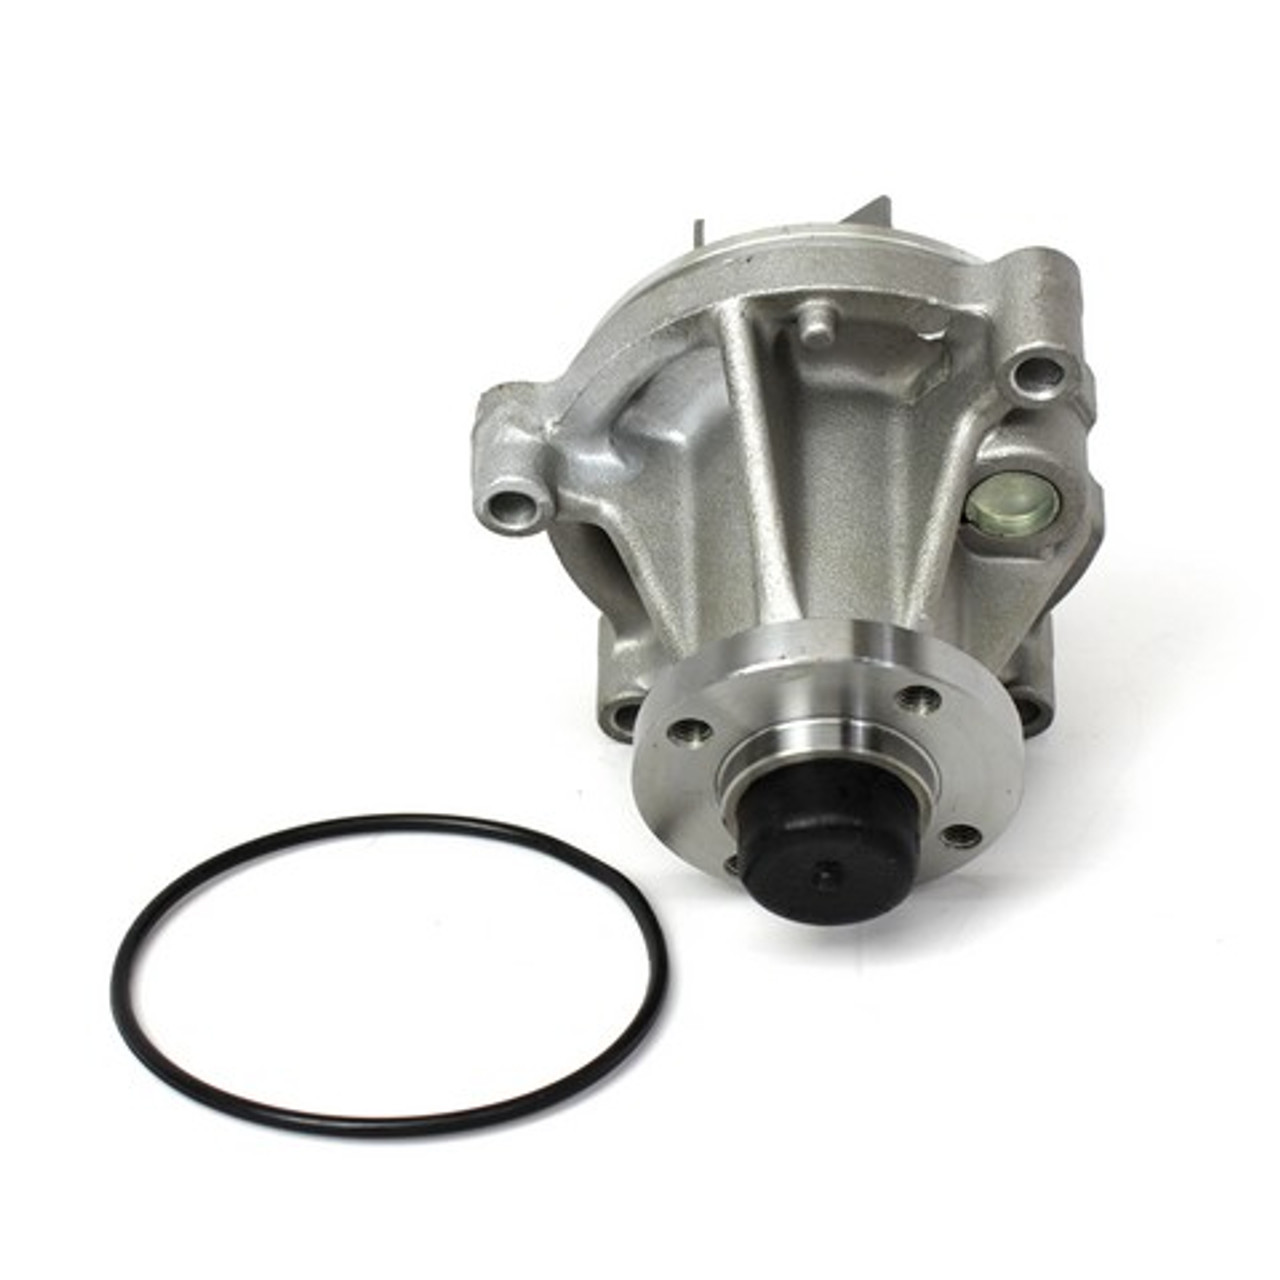 Water Pump 4.6L 2011 Ford E-250 - WP4170.47